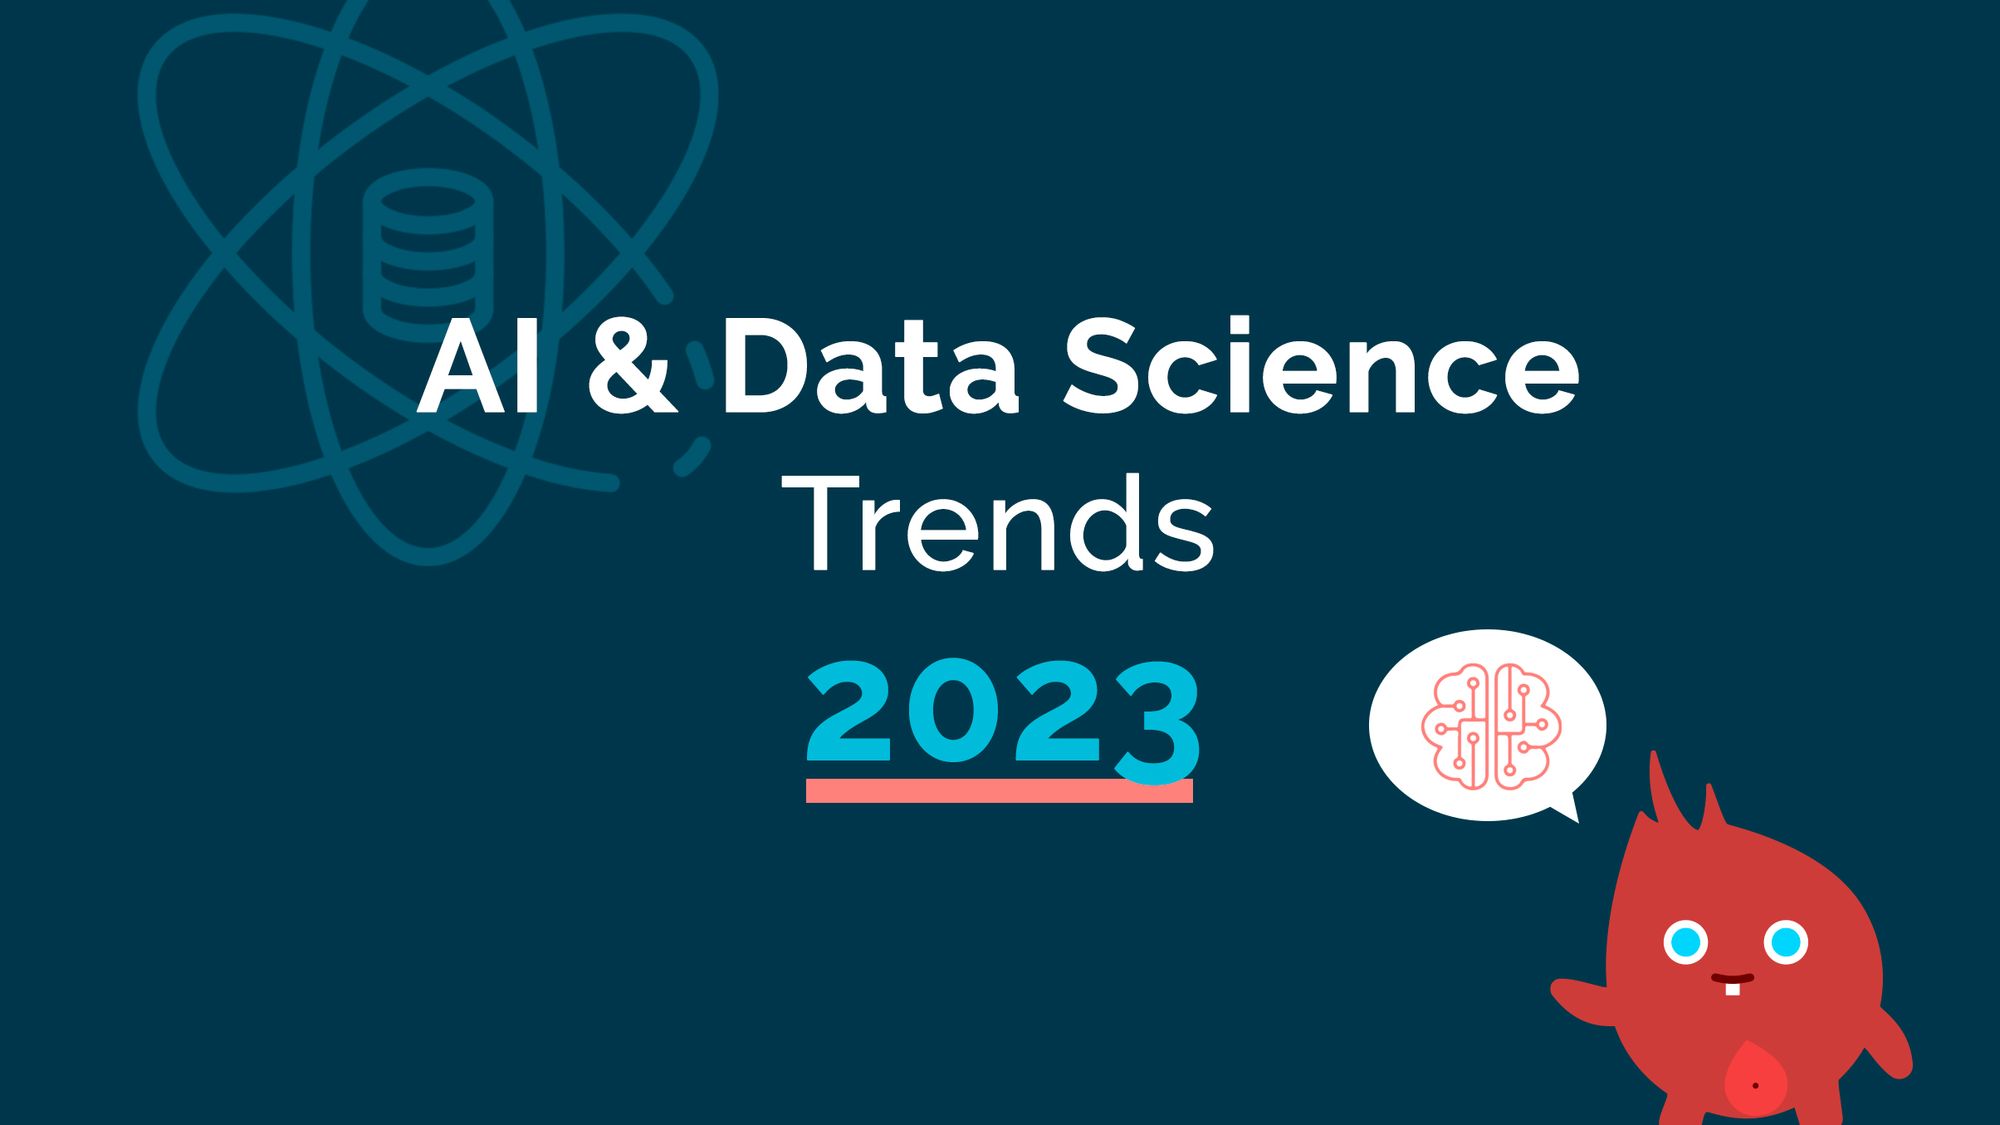 5 Data Science & AI trends to look out for in 2023